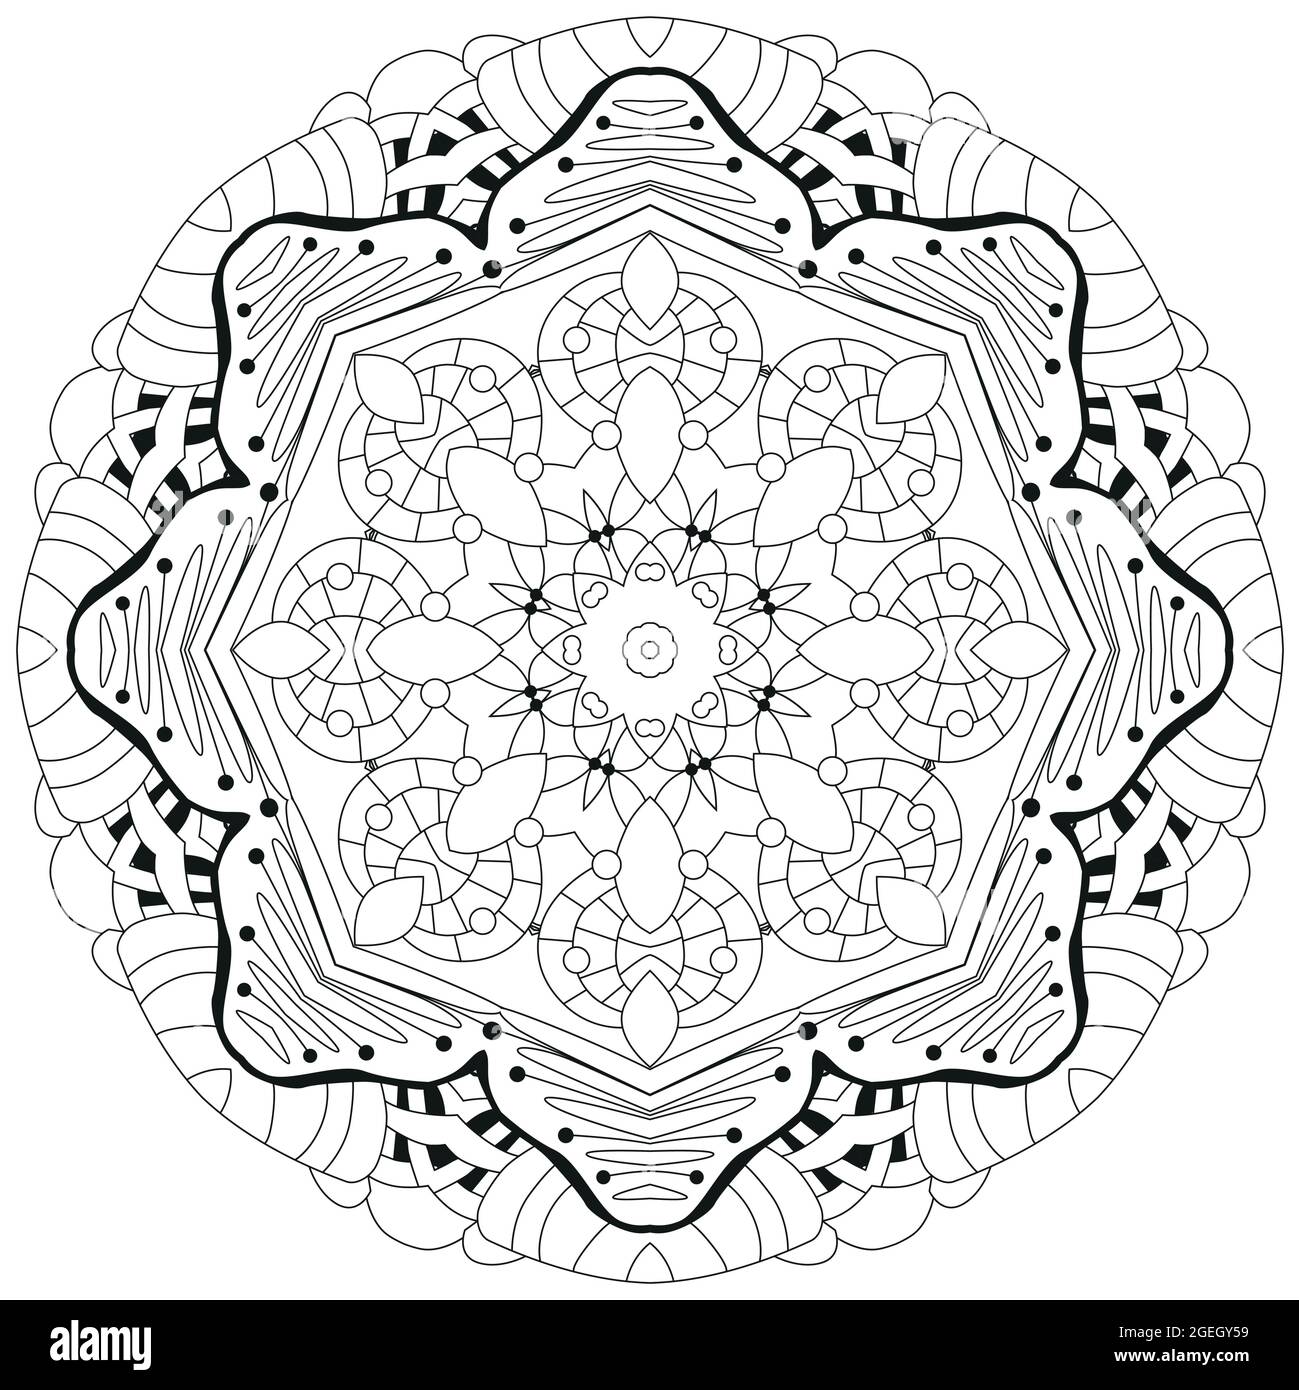 Vector Adult Coloring Book Textures. Hand-painted art design. Adult anti-stress coloring page. Black and white hand drawn illustration for coloring bo Stock Vector